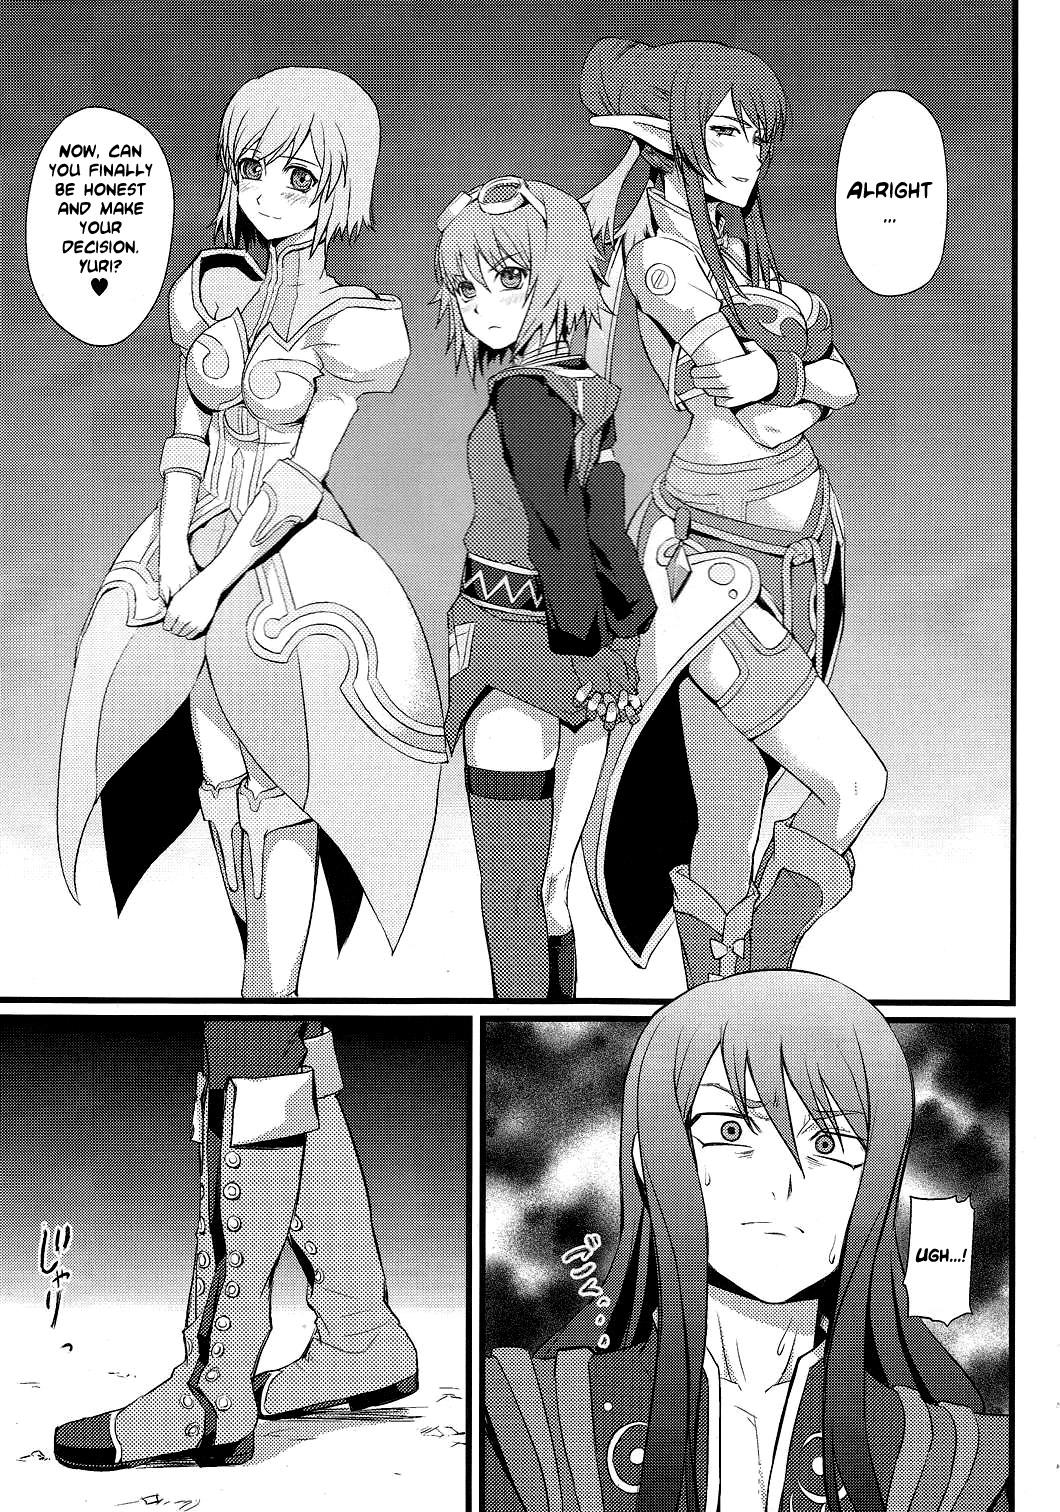 Lady Strike! Army of Beauties - Tales of vesperia Hunks - Page 4